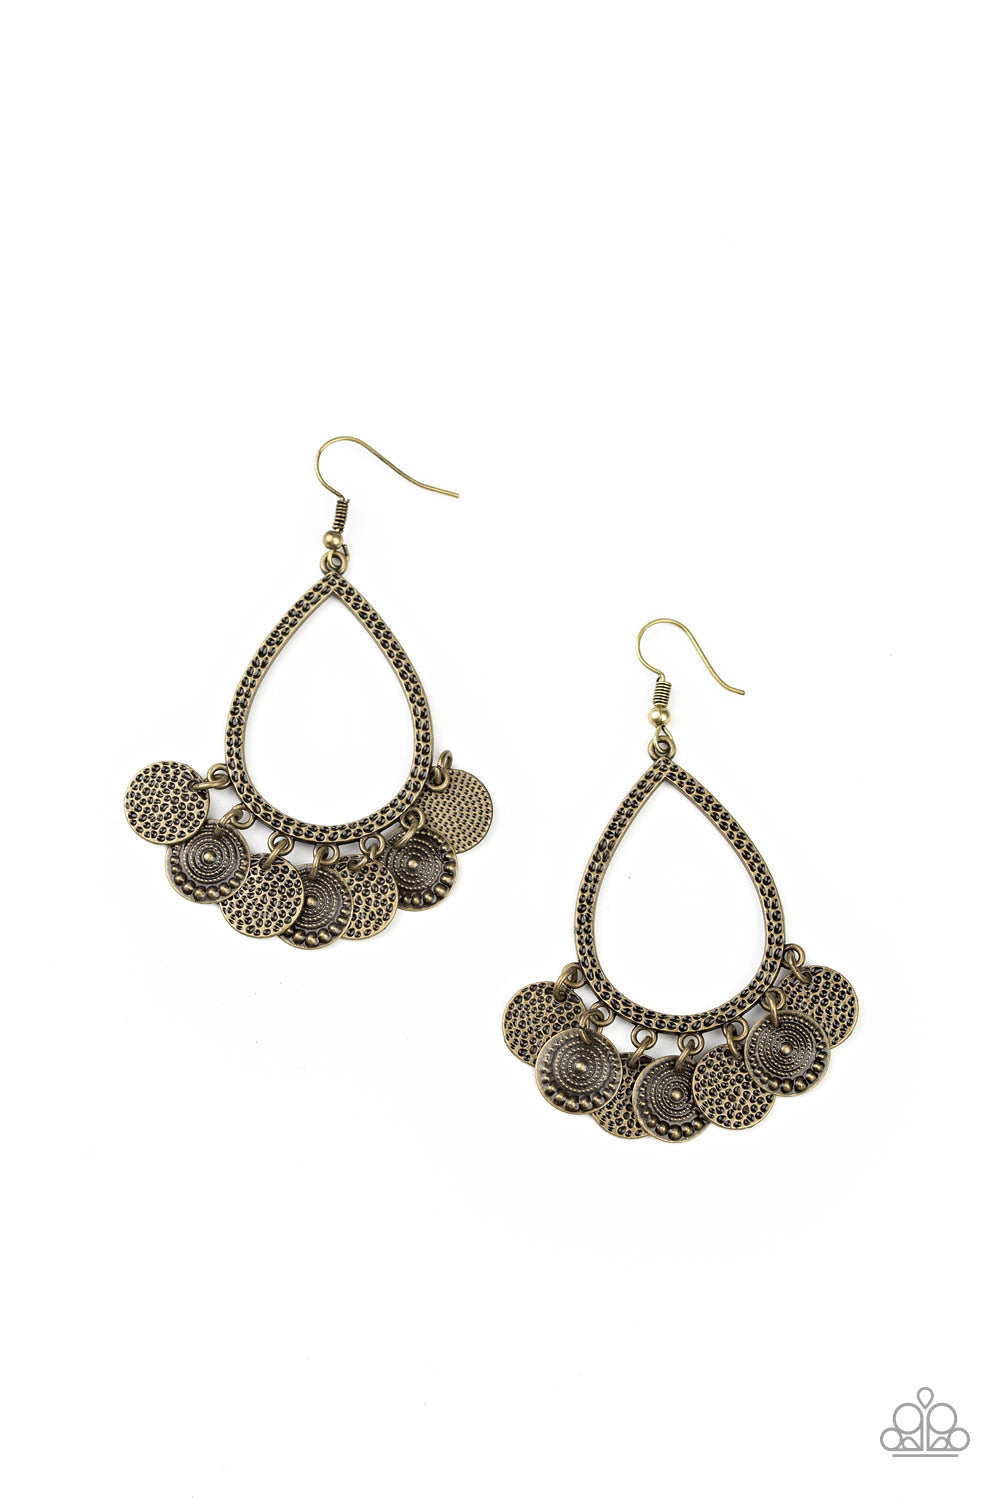 five-dollar-jewelry-all-in-good-chime-brass-earrings-paparazzi-accessories